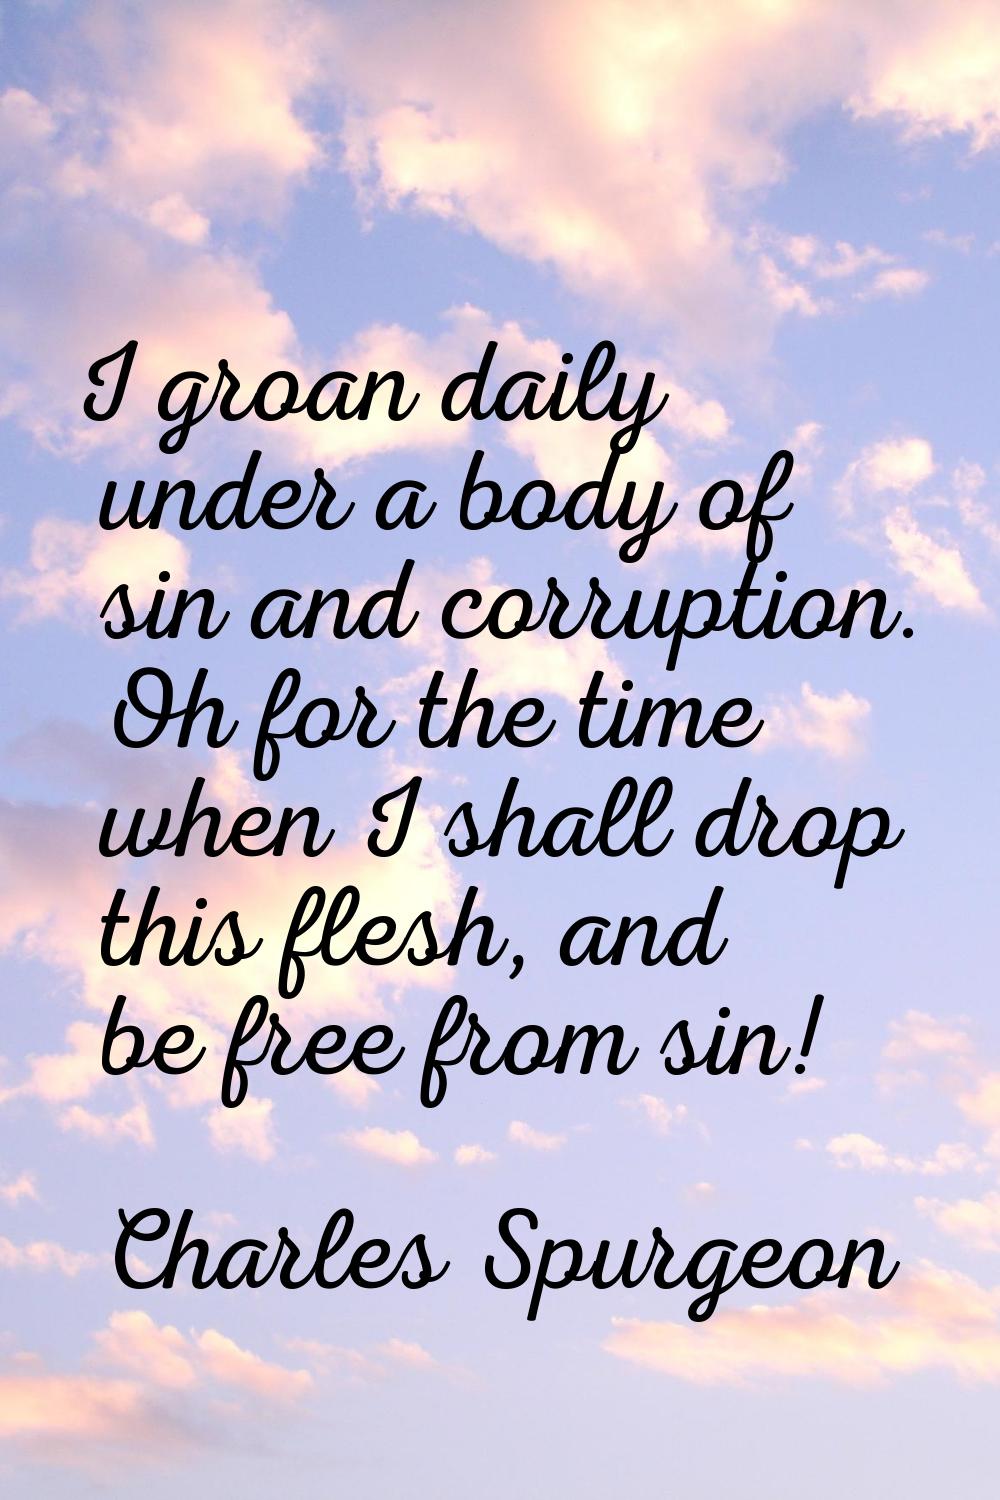 I groan daily under a body of sin and corruption. Oh for the time when I shall drop this flesh, and